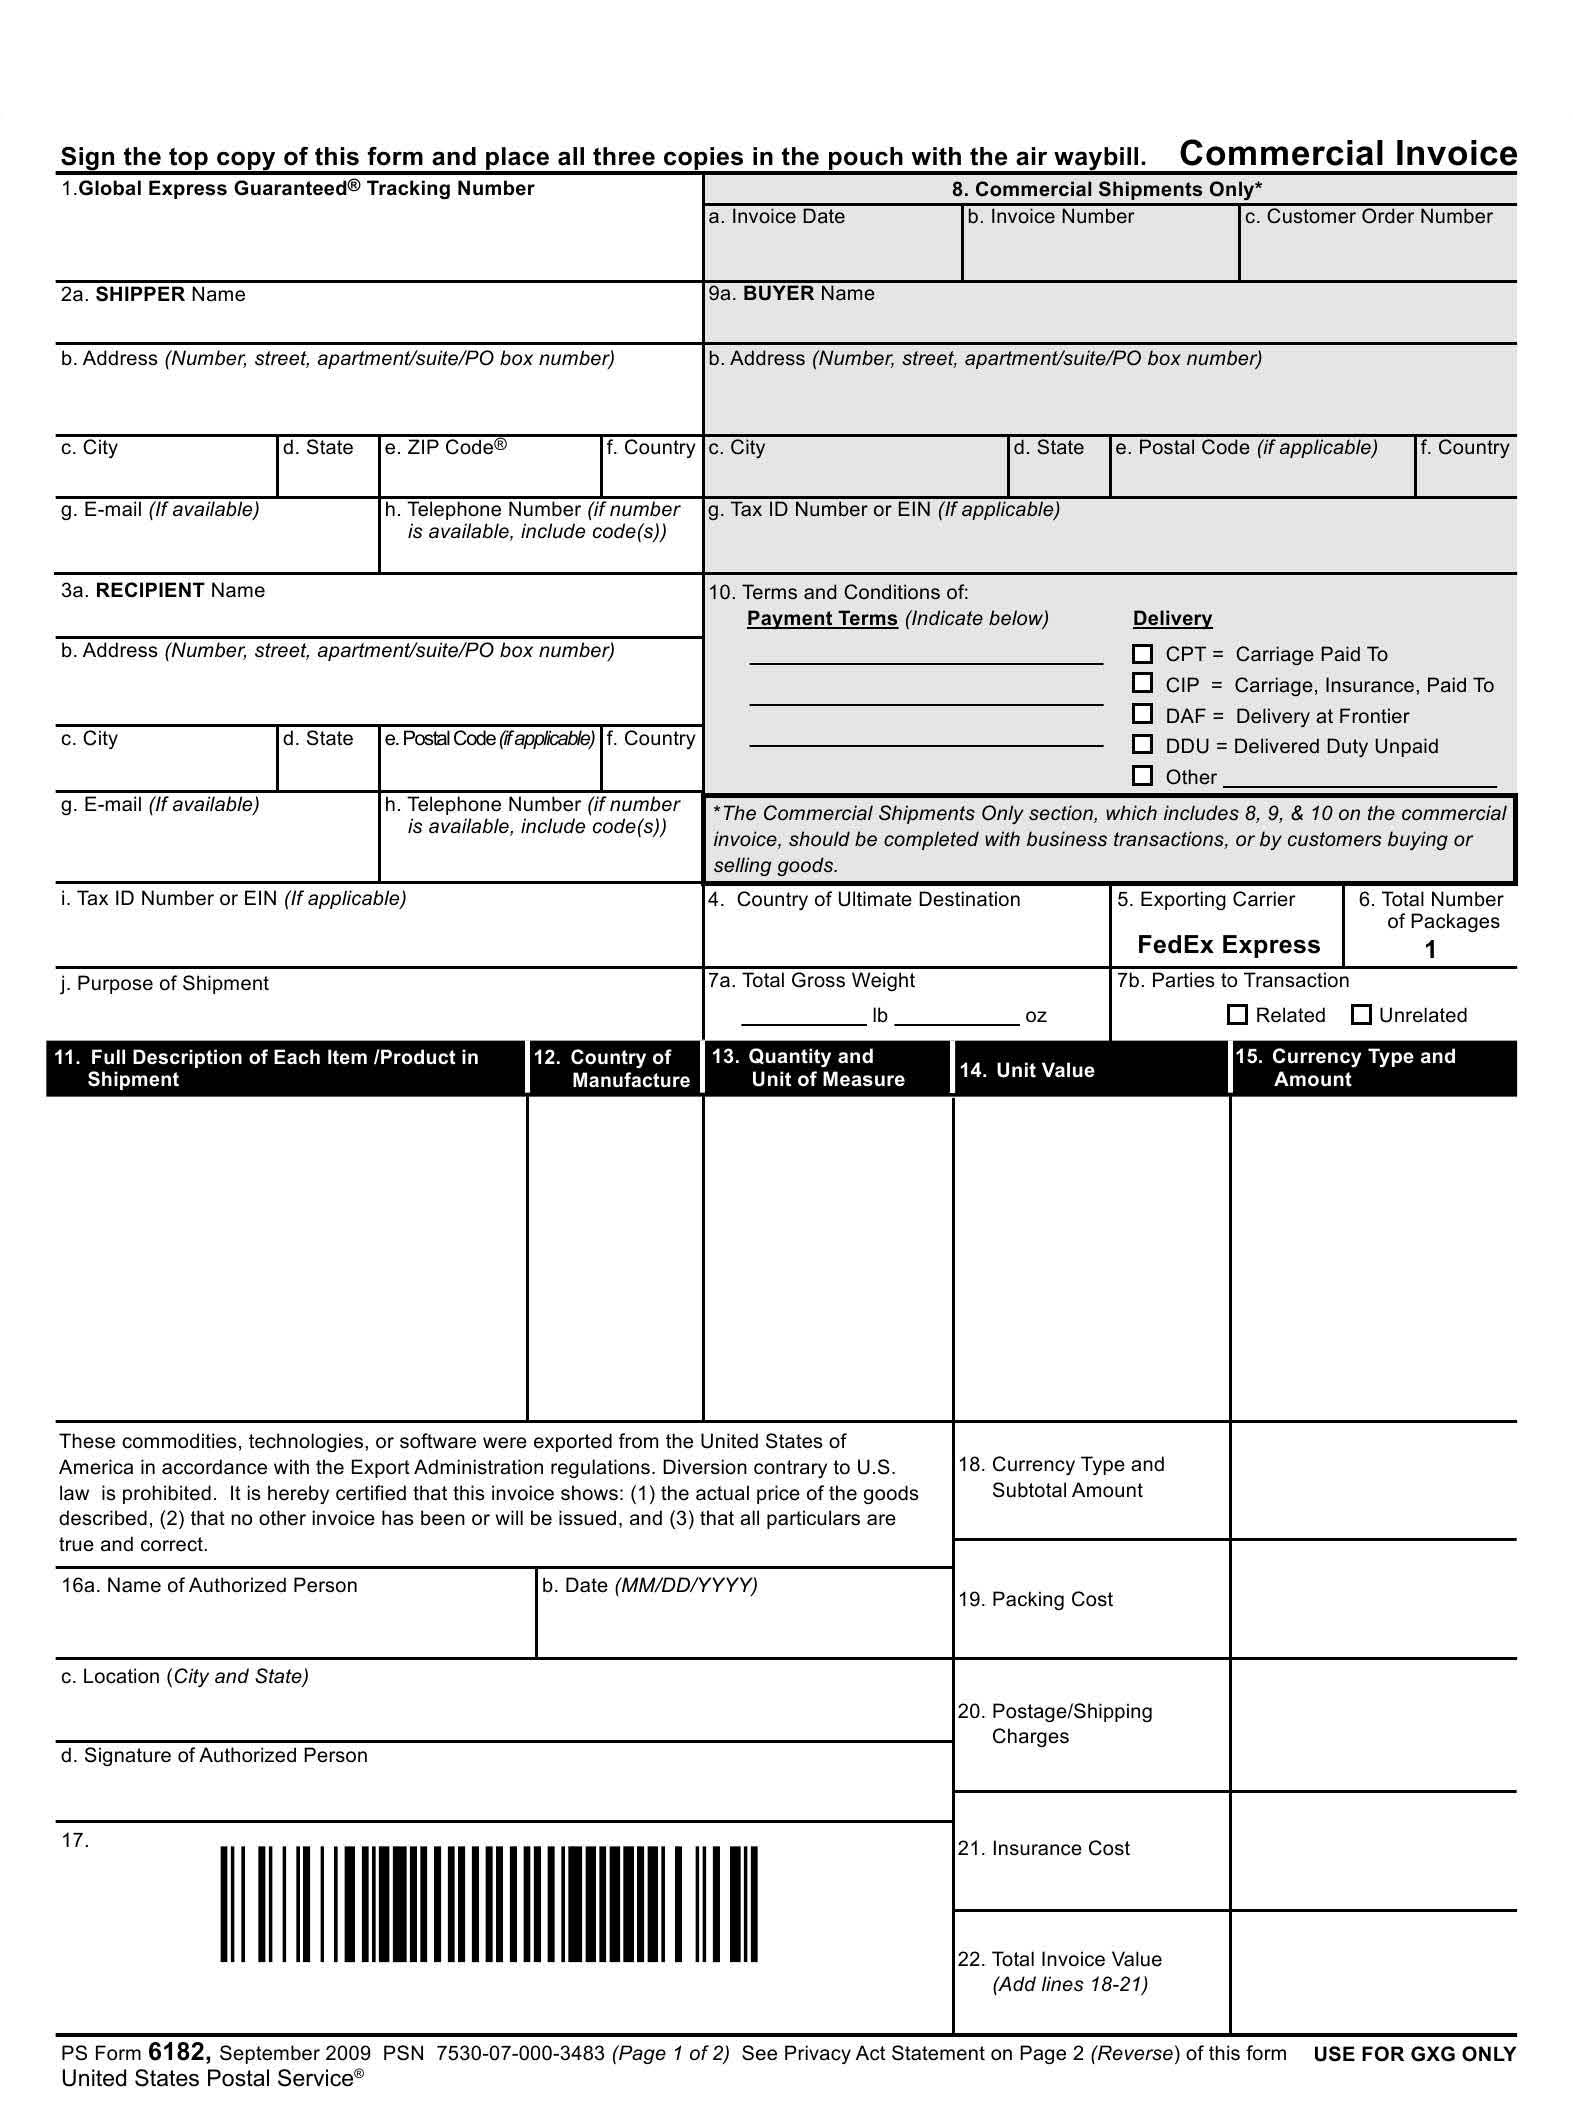 commercial invoice generic commercial invoice